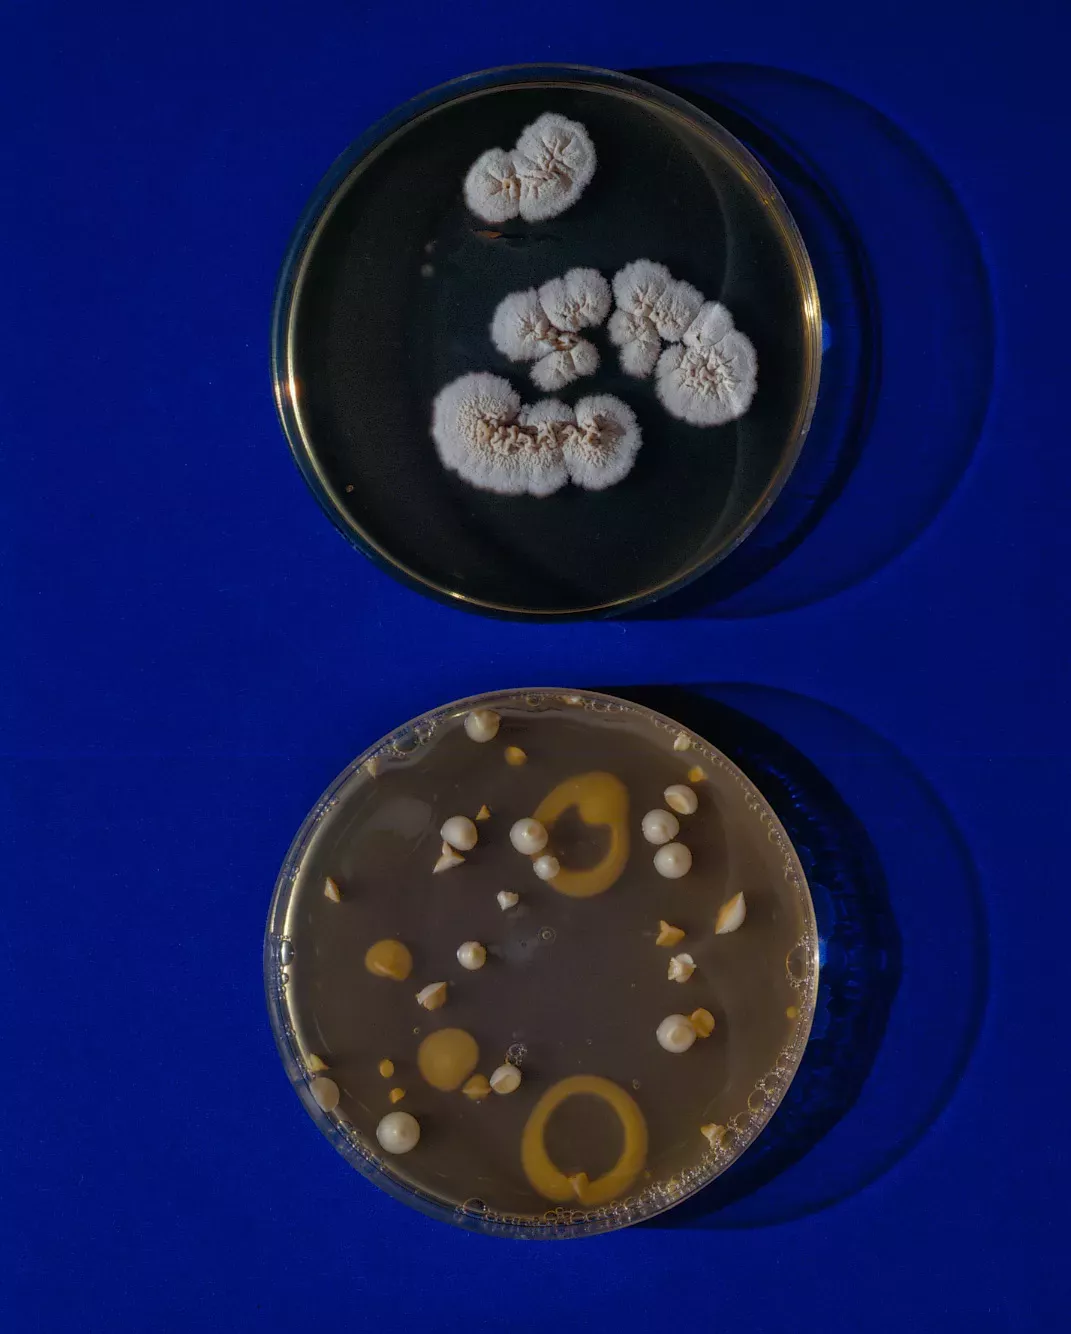 close-up-of-microbiological-culture